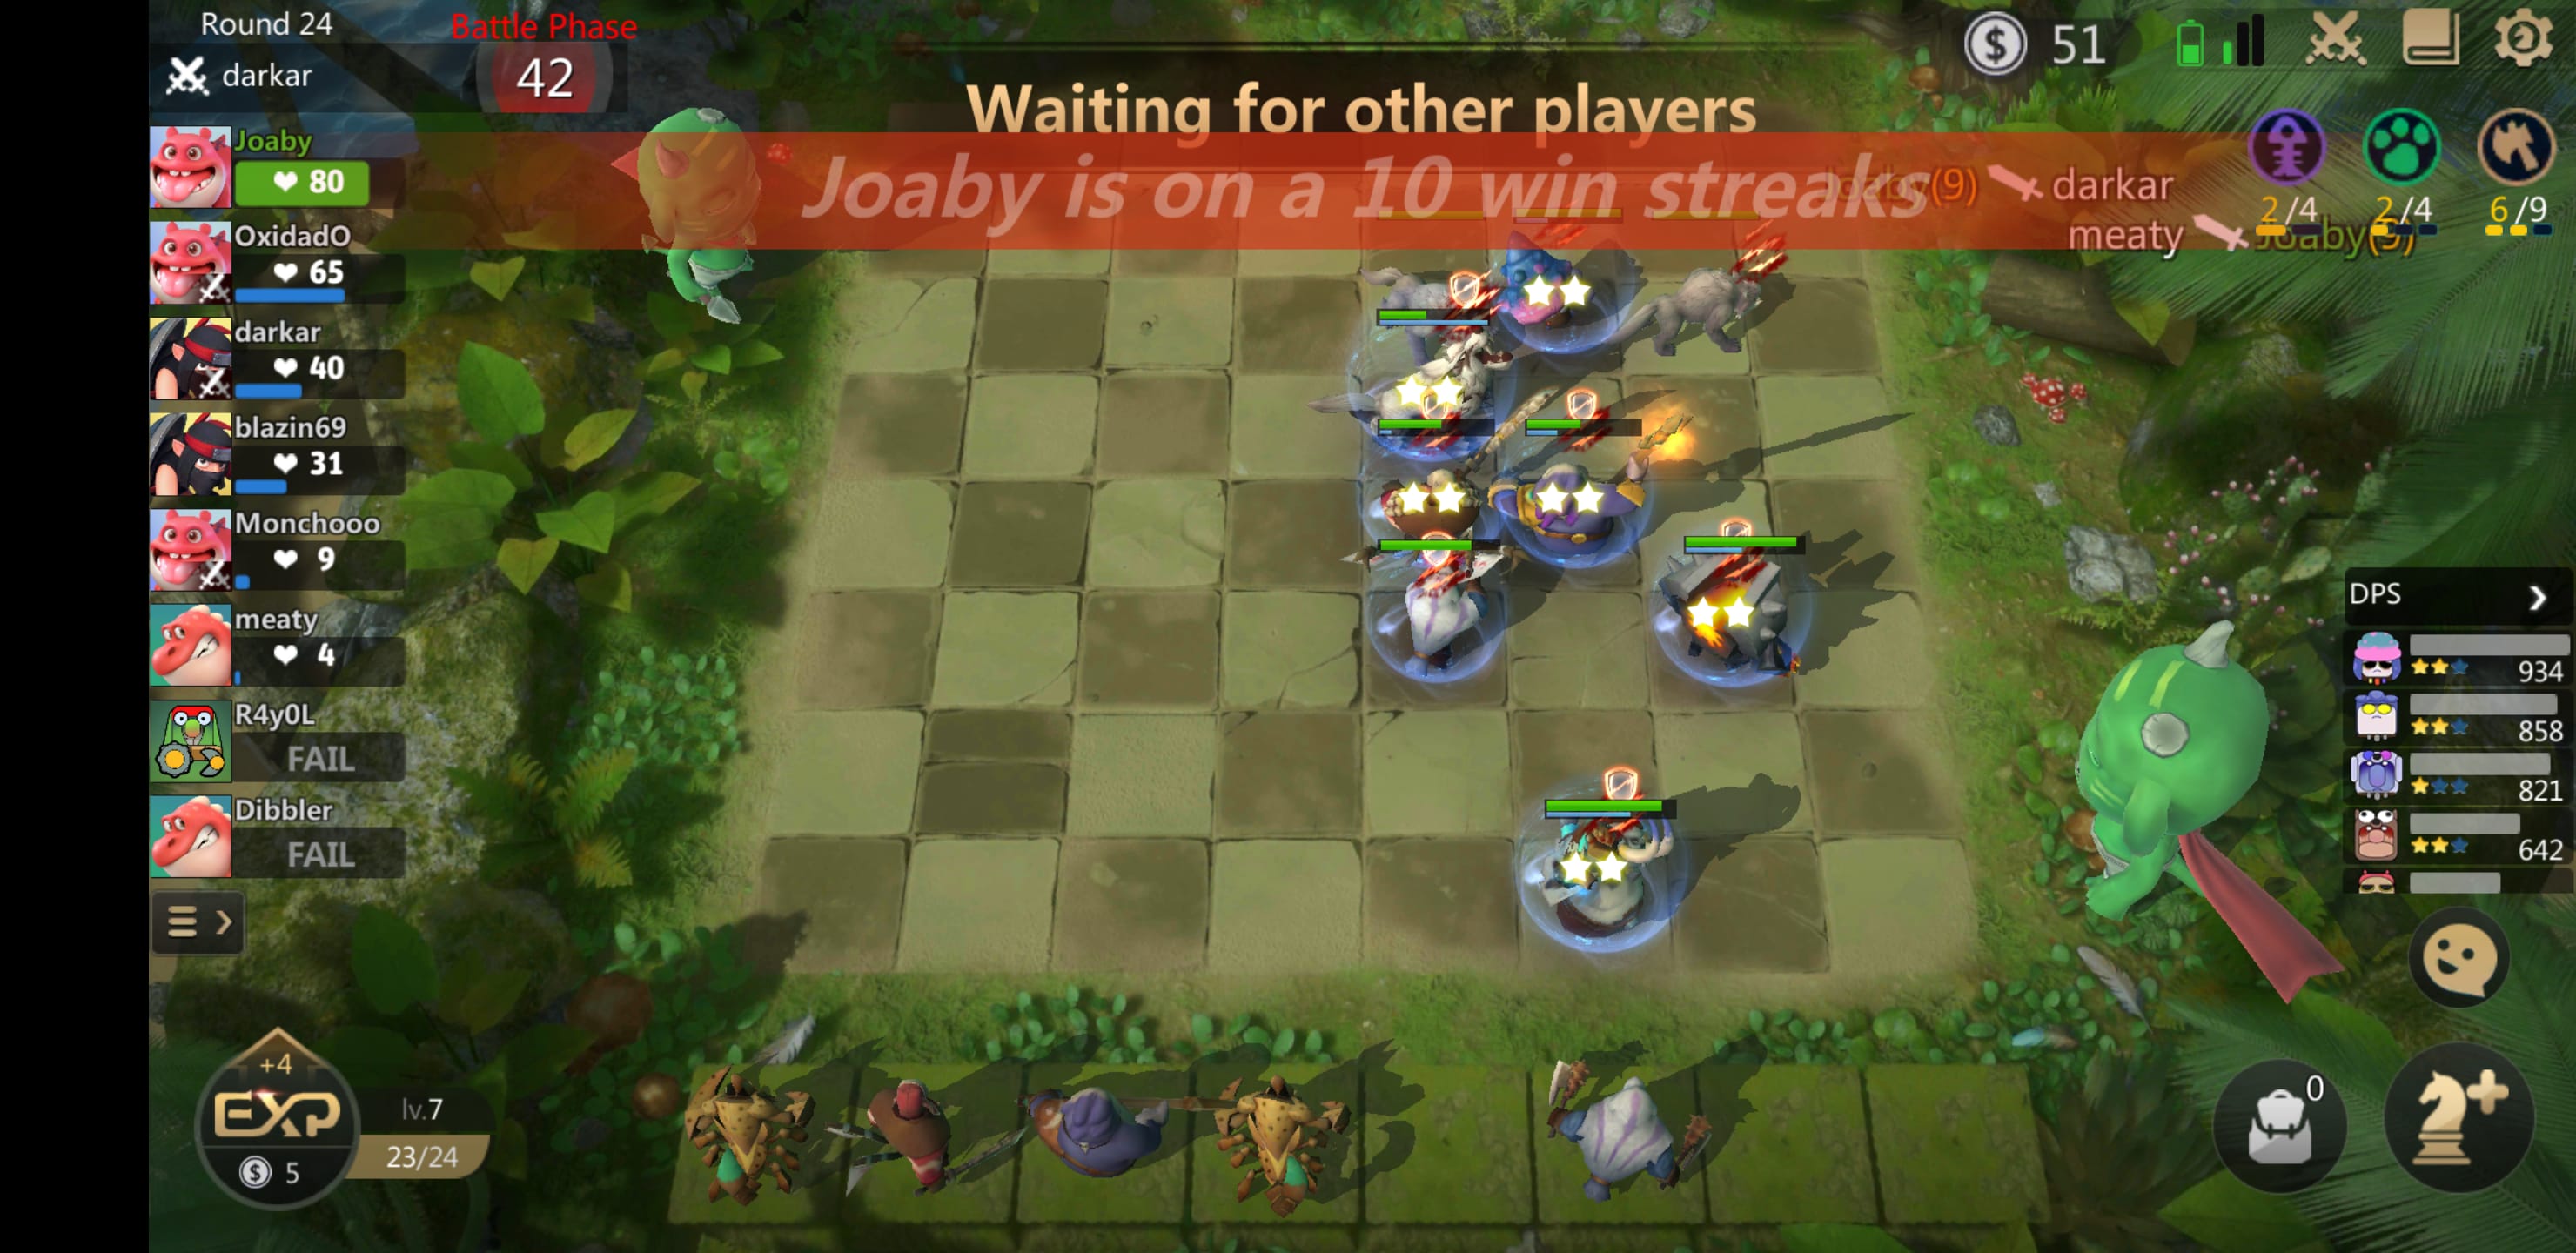 The mobile version of Auto Chess won't feature Dota characters